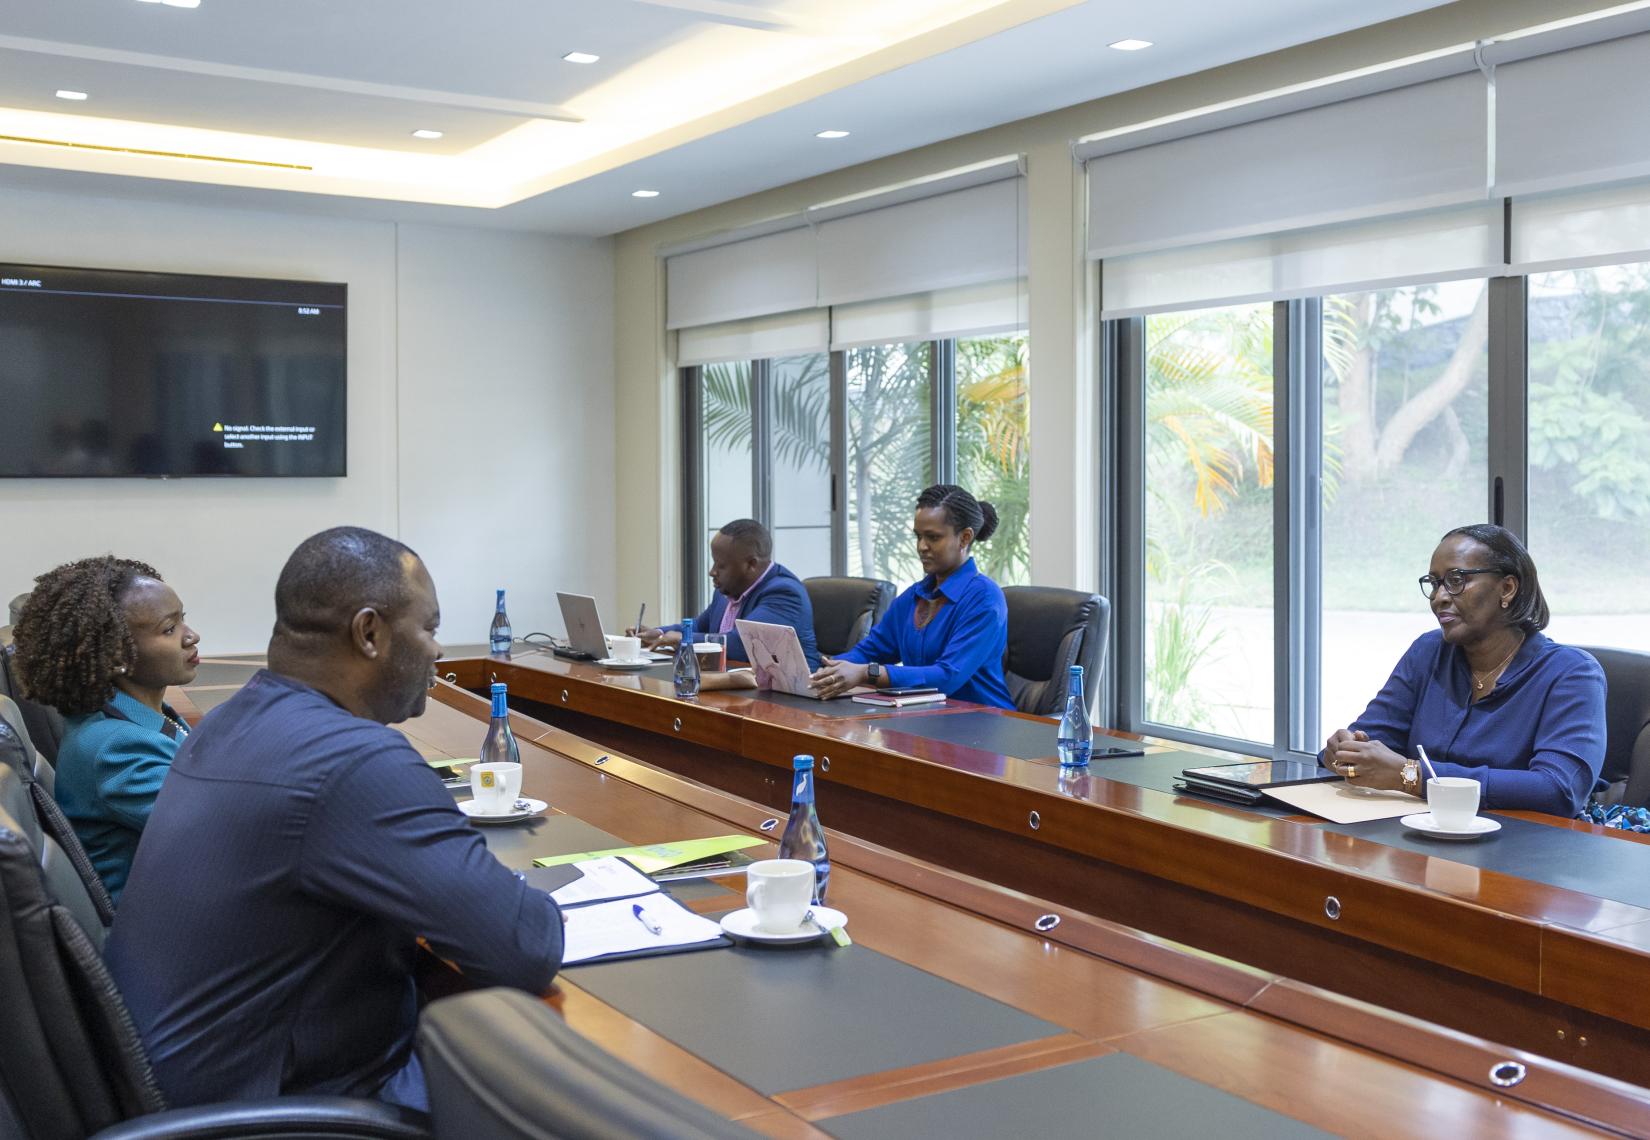 First Lady of Rwanda, Mrs Jeannette Kagame welcomed One UN Resident Coordinator, Dr. Ozonnia Ojielo, who paid her a courtesy call at Imbuto Foundation Offices. They discussed opportunities for future strategic partnership between Imbuto Foundation and UN Rwanda.